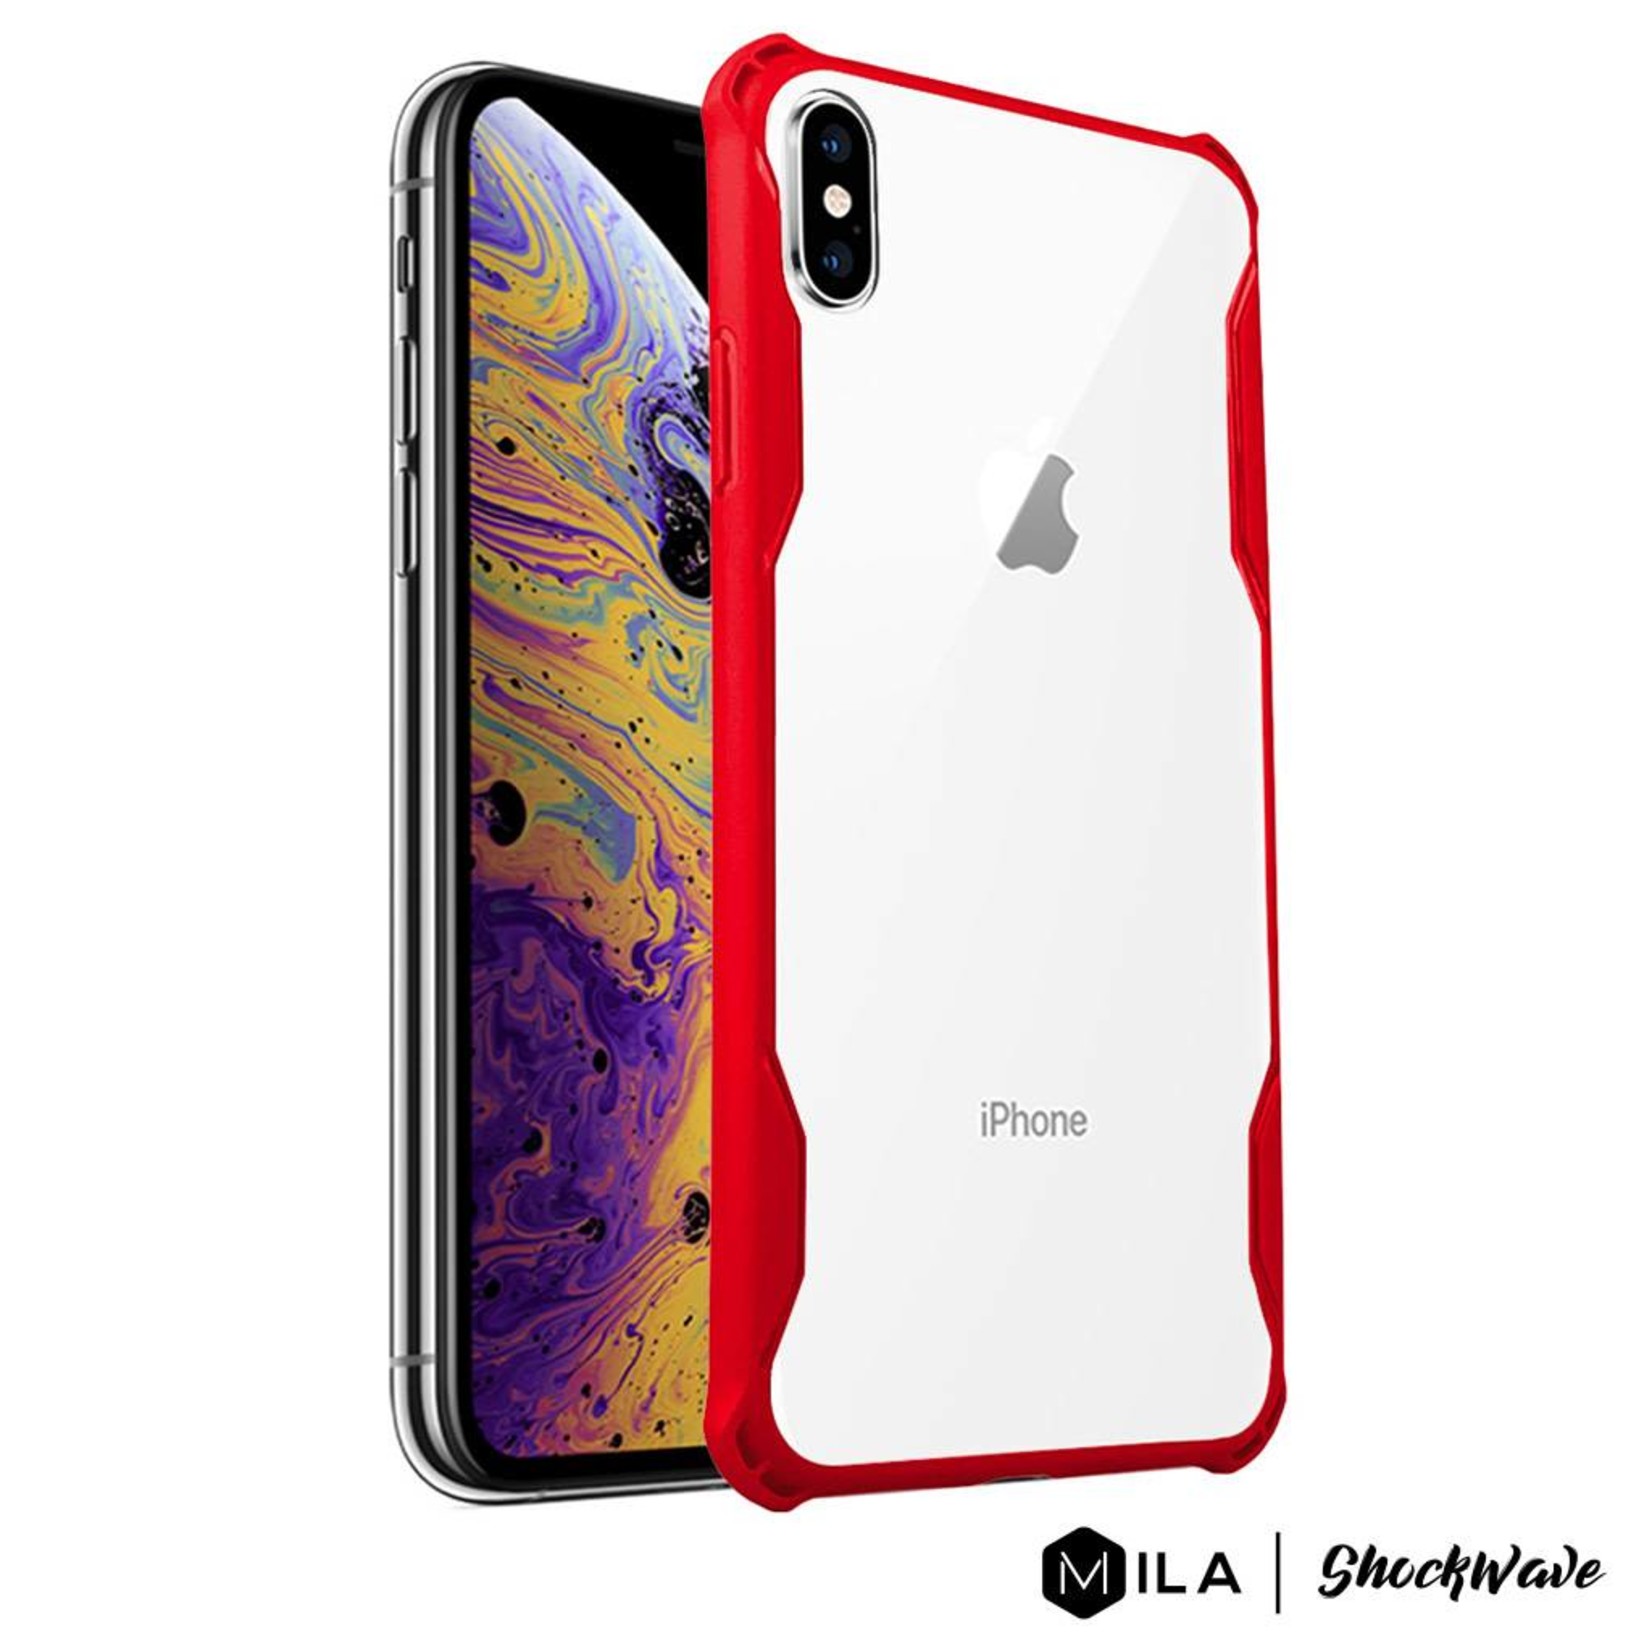 MILA | ShockWave Case for iPhone XS Max